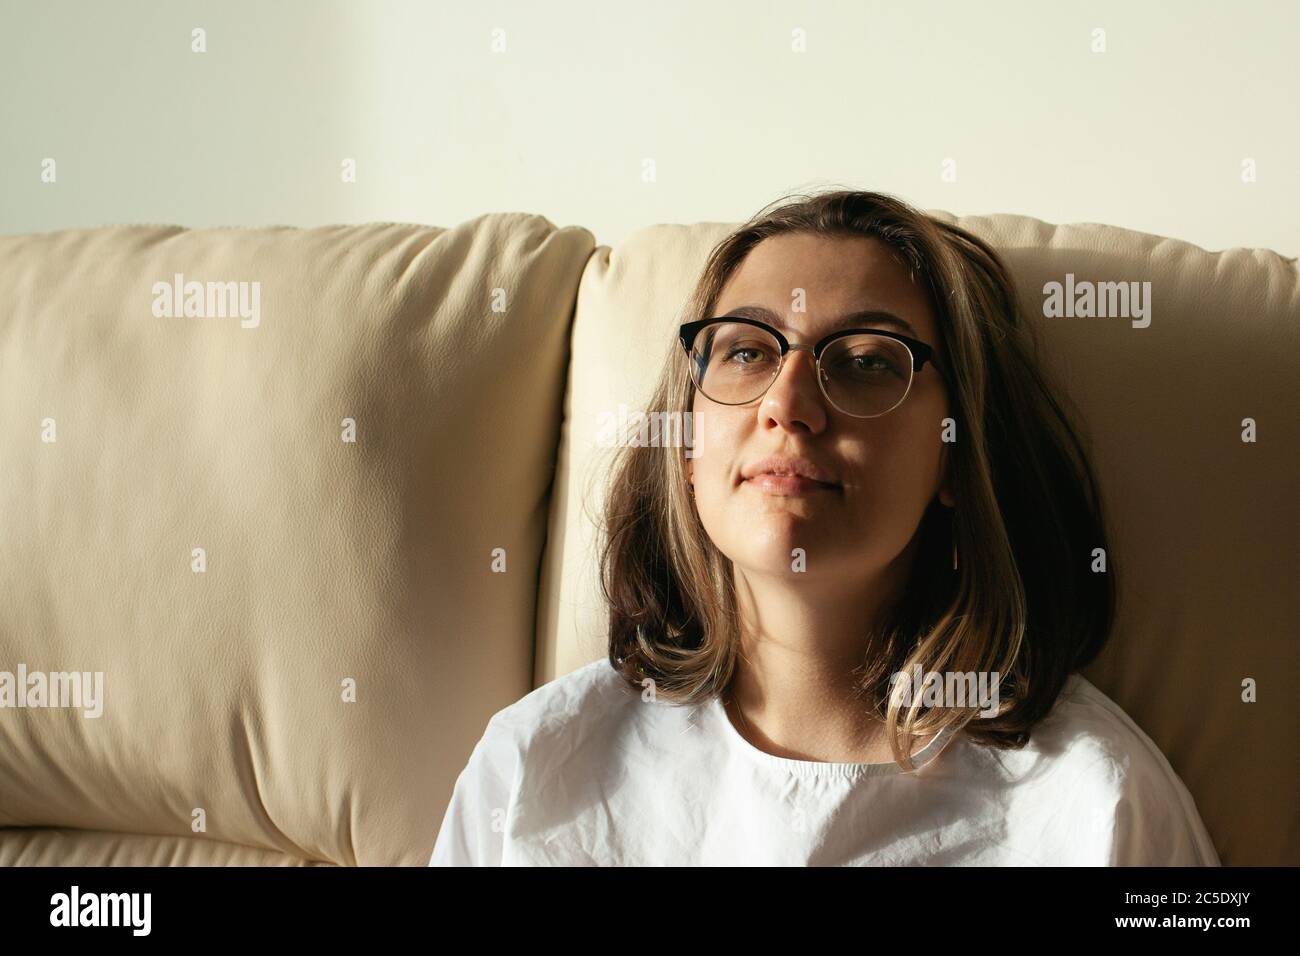 Portrait of young woman at home. The concept of natural beauty, femininity, feminism, body positive. Stock Photo